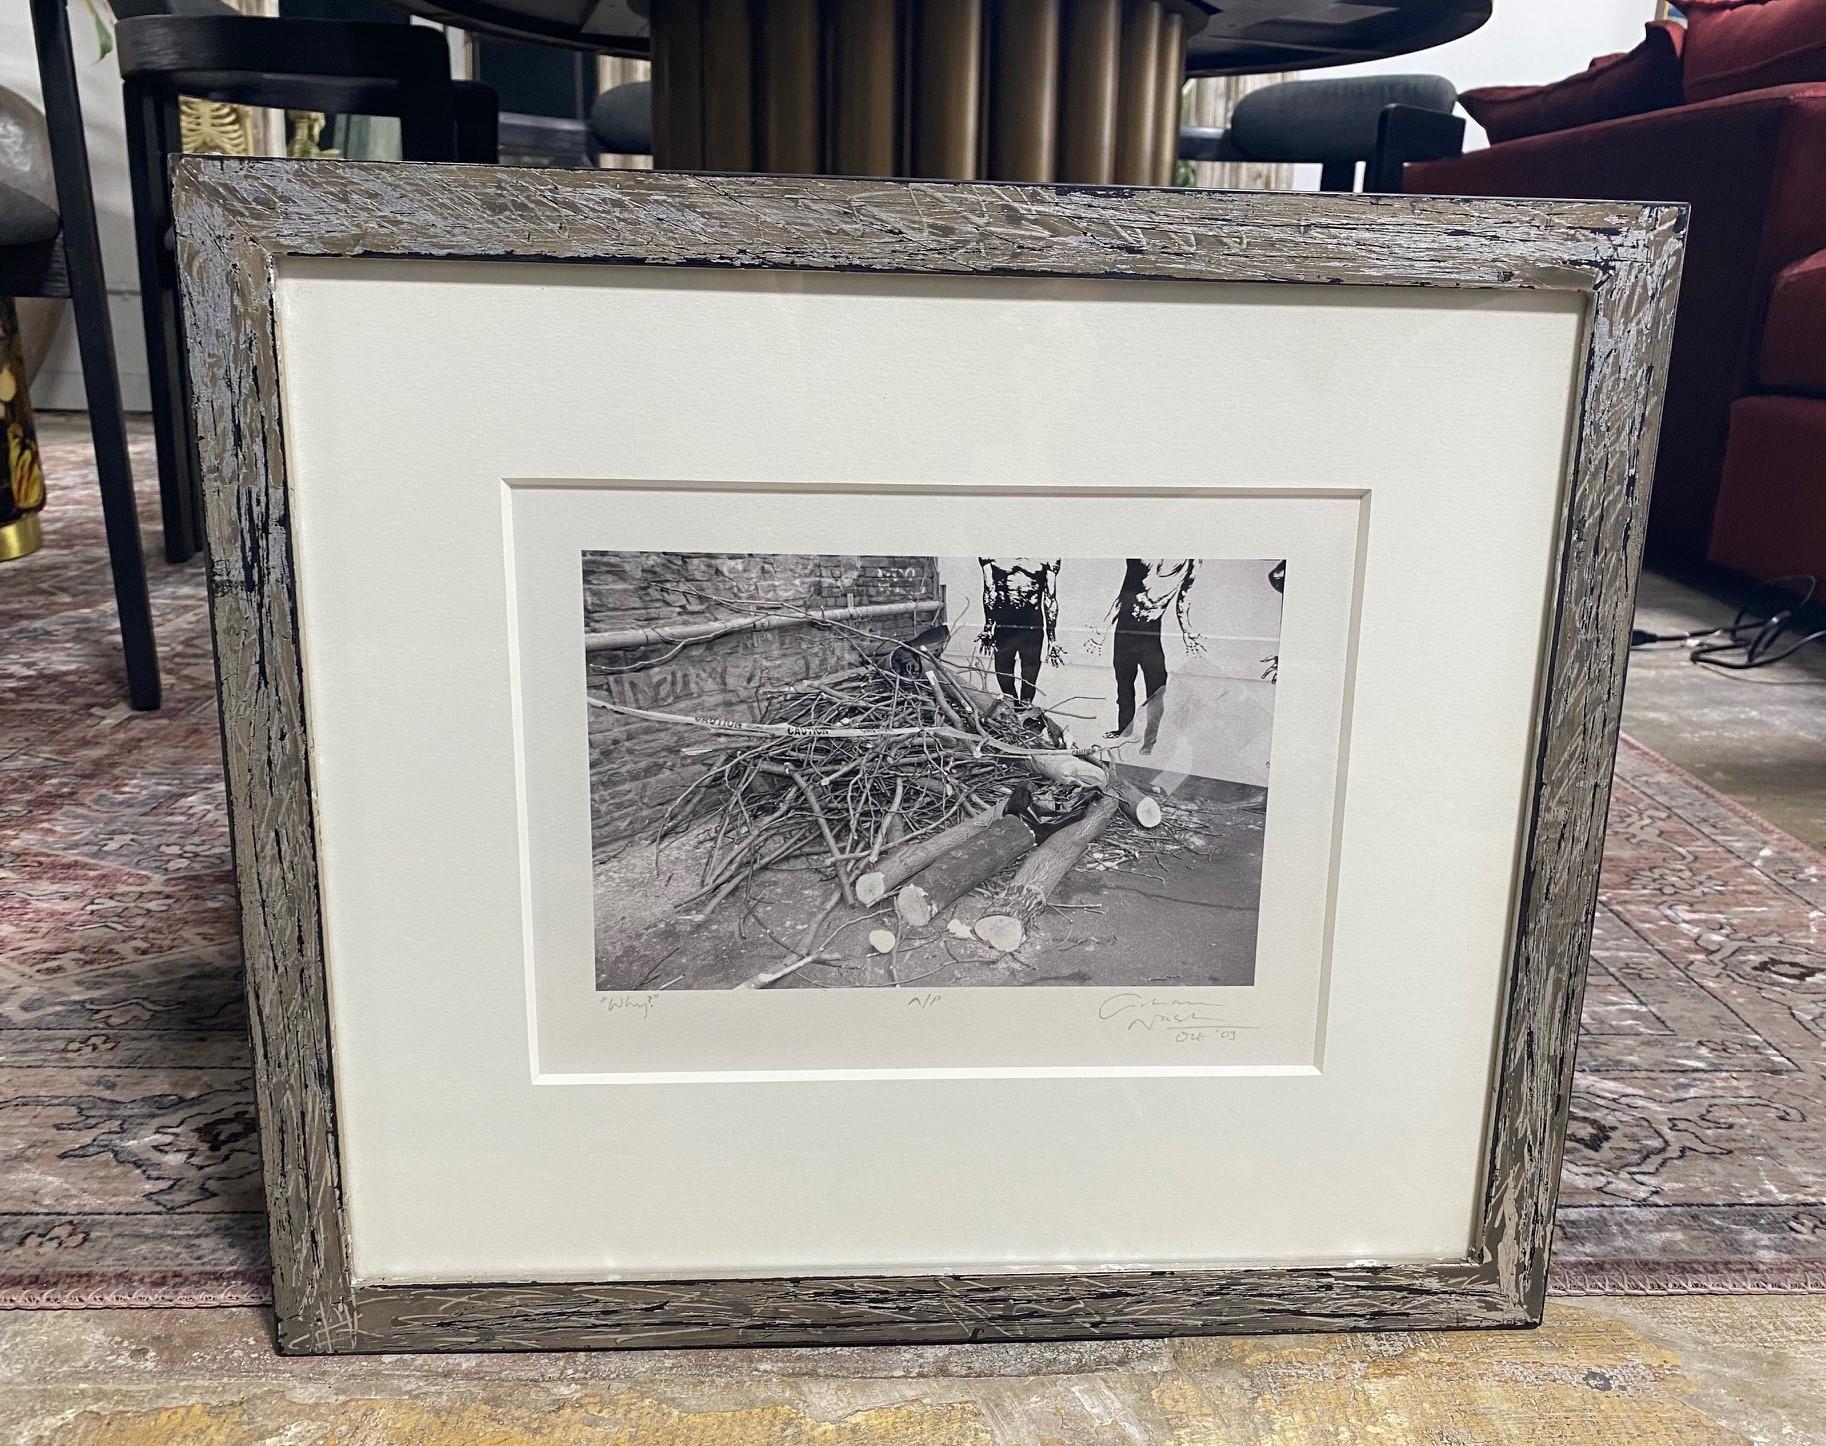 An engaging photographic image by famed British musician and photographer Graham Nash (from the folk-rock supergroups Crosby, Stills & Nash and Crosby, Stills, Nash & Young). Nash's love of photography dating back to his youth is well documented.